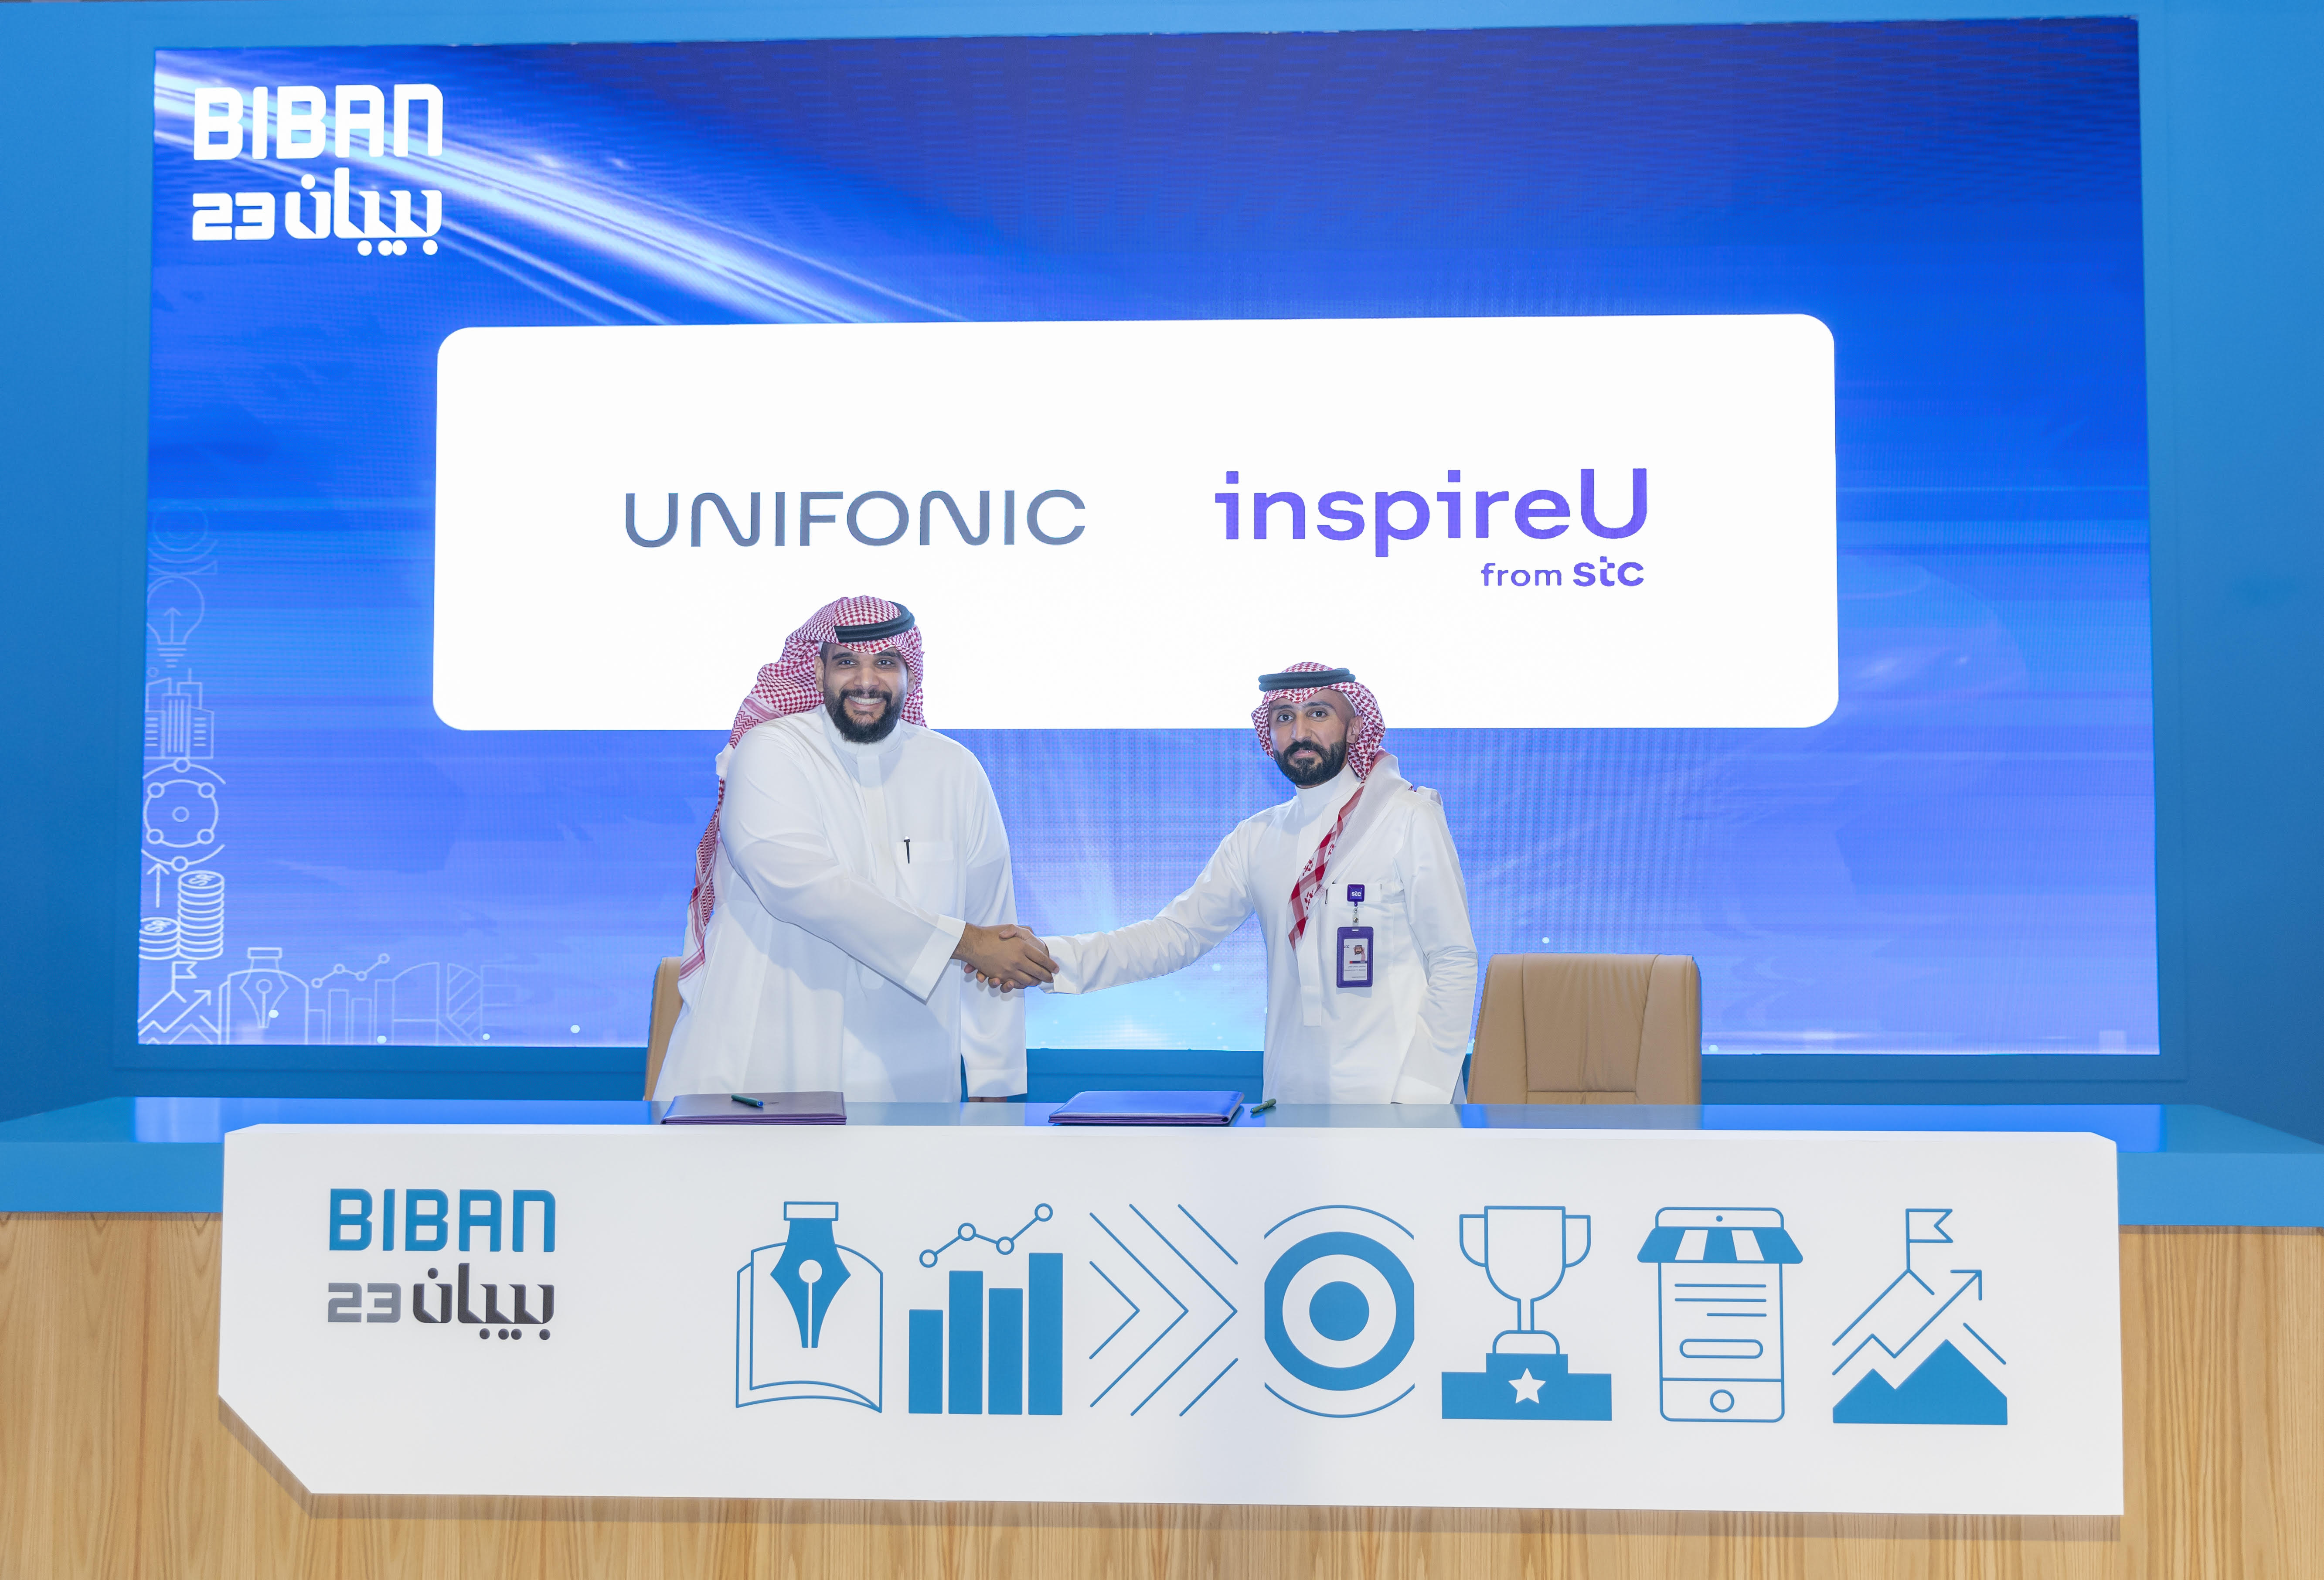 Unifonic partners with InspireU to empower the startup ecosystem in Saudi Arabia